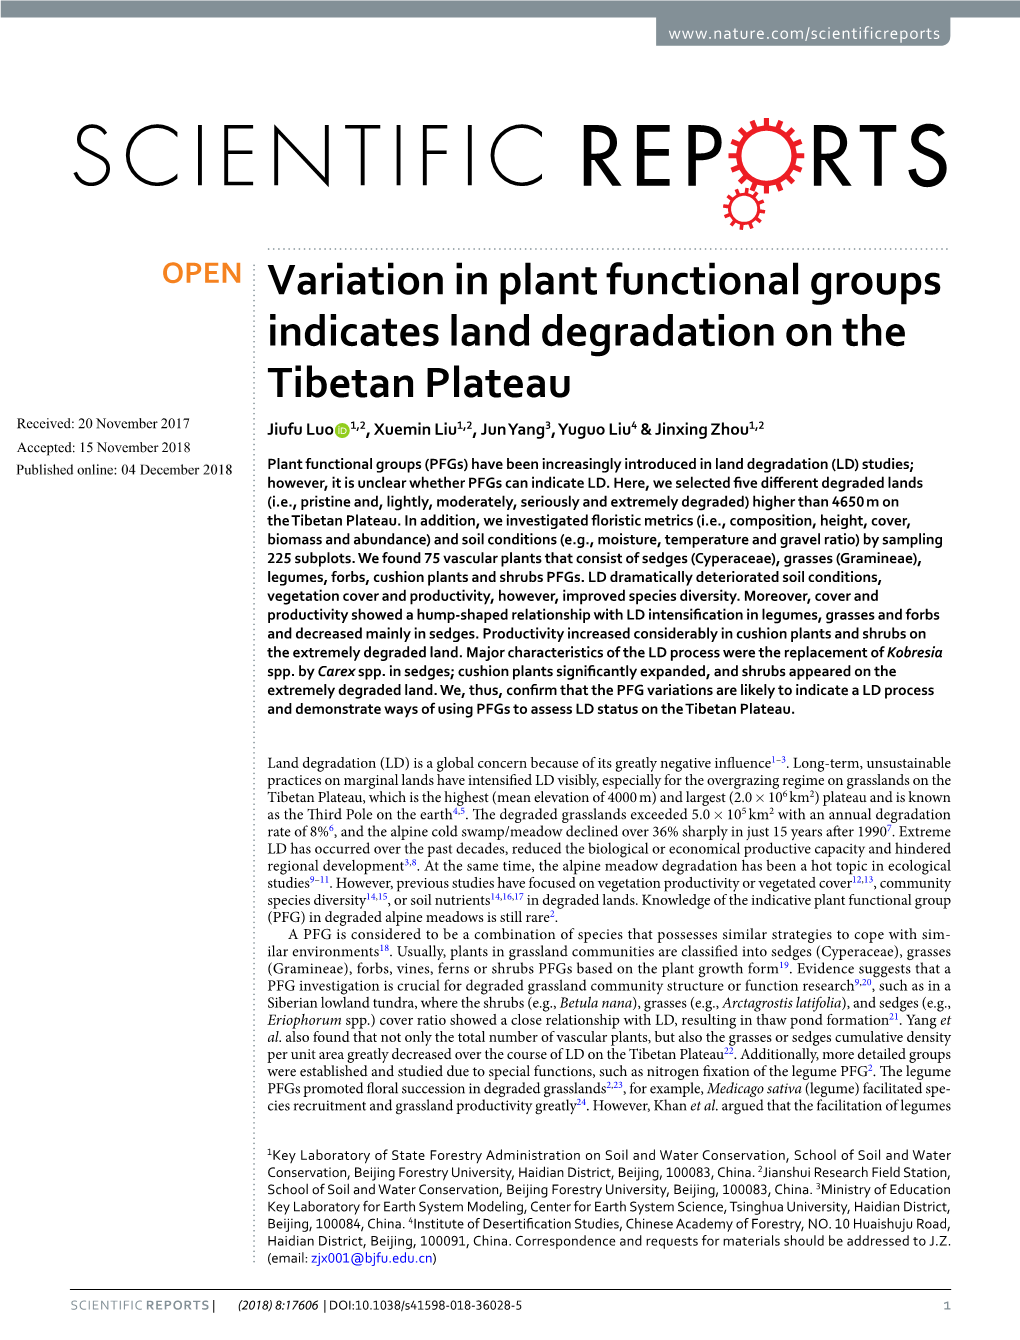 Variation in Plant Functional Groups Indicates Land Degradation on The